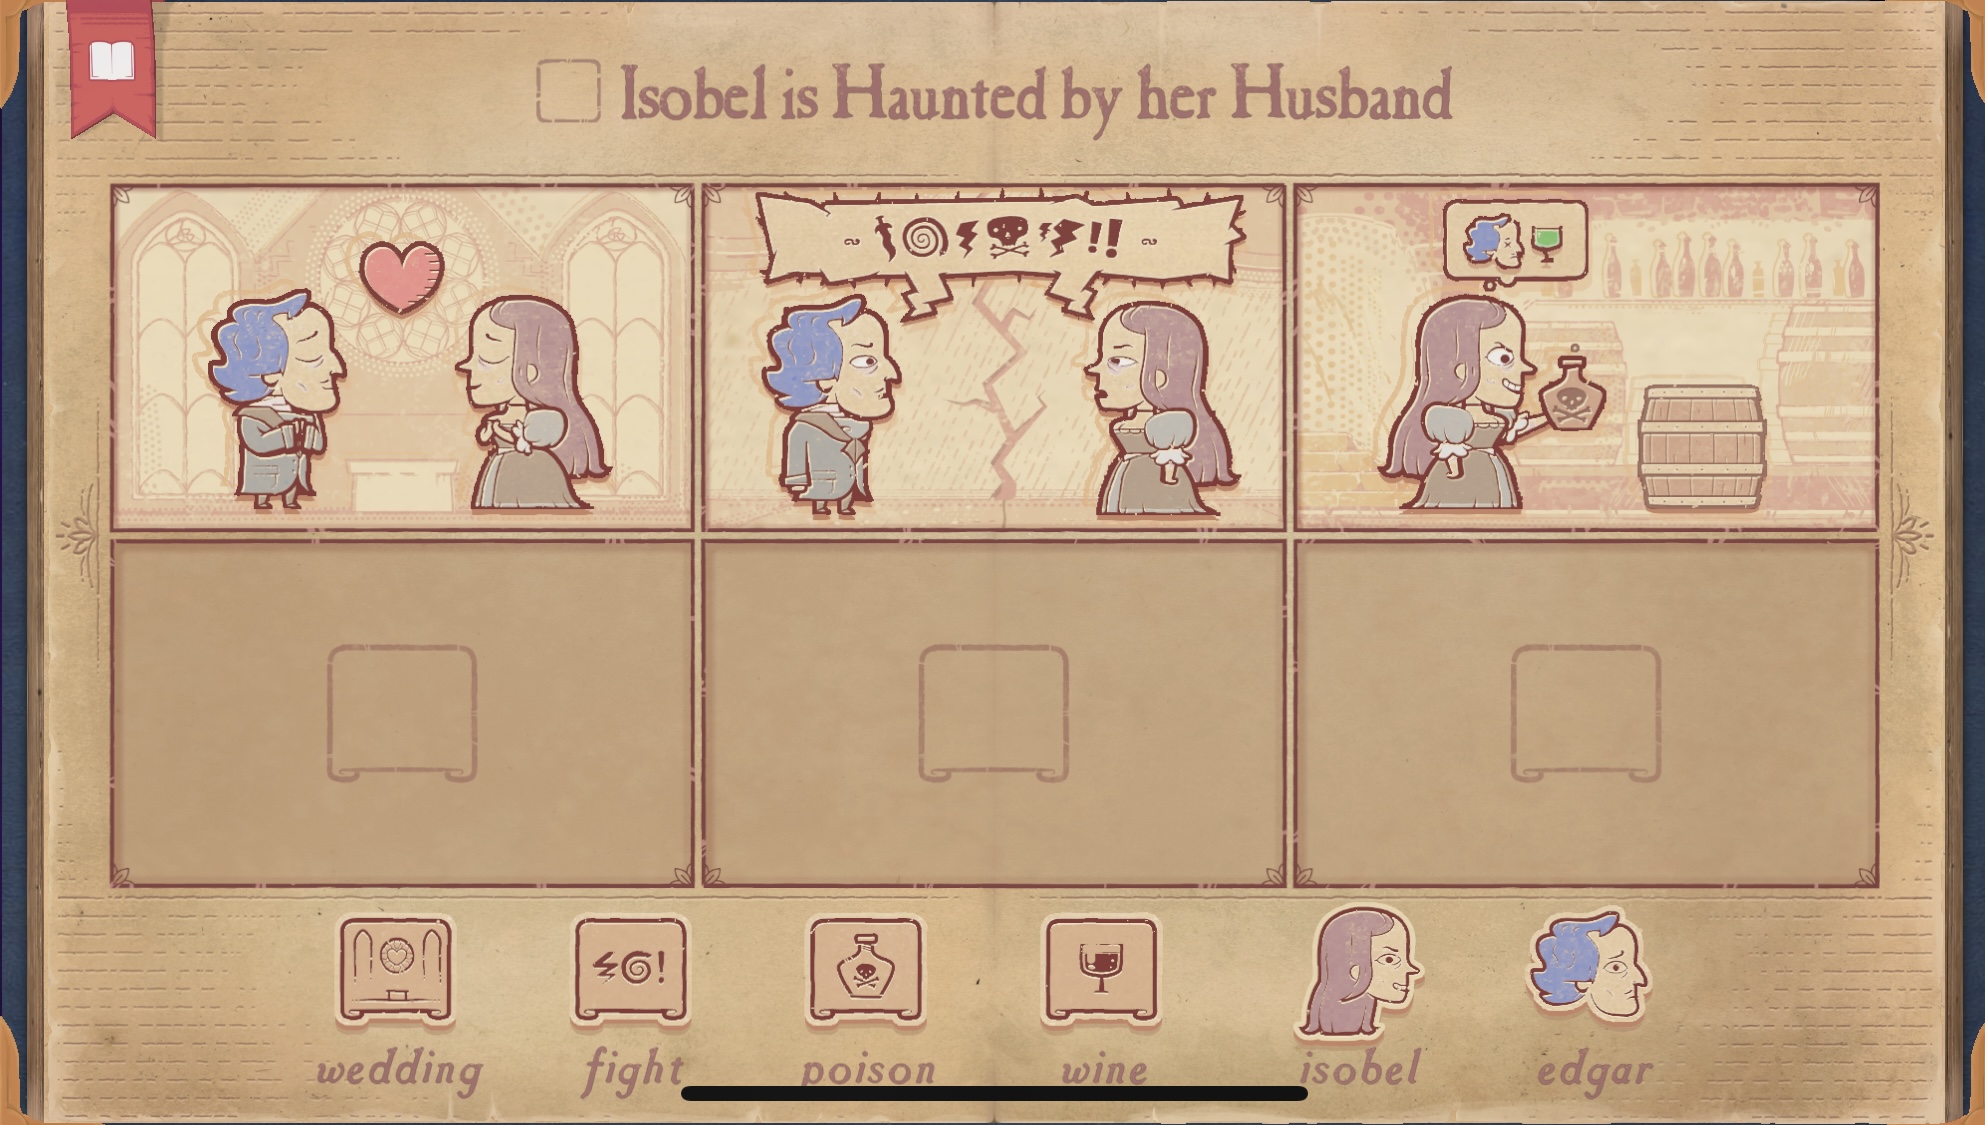 a screenshot of a game involving comic book slots with character interactions